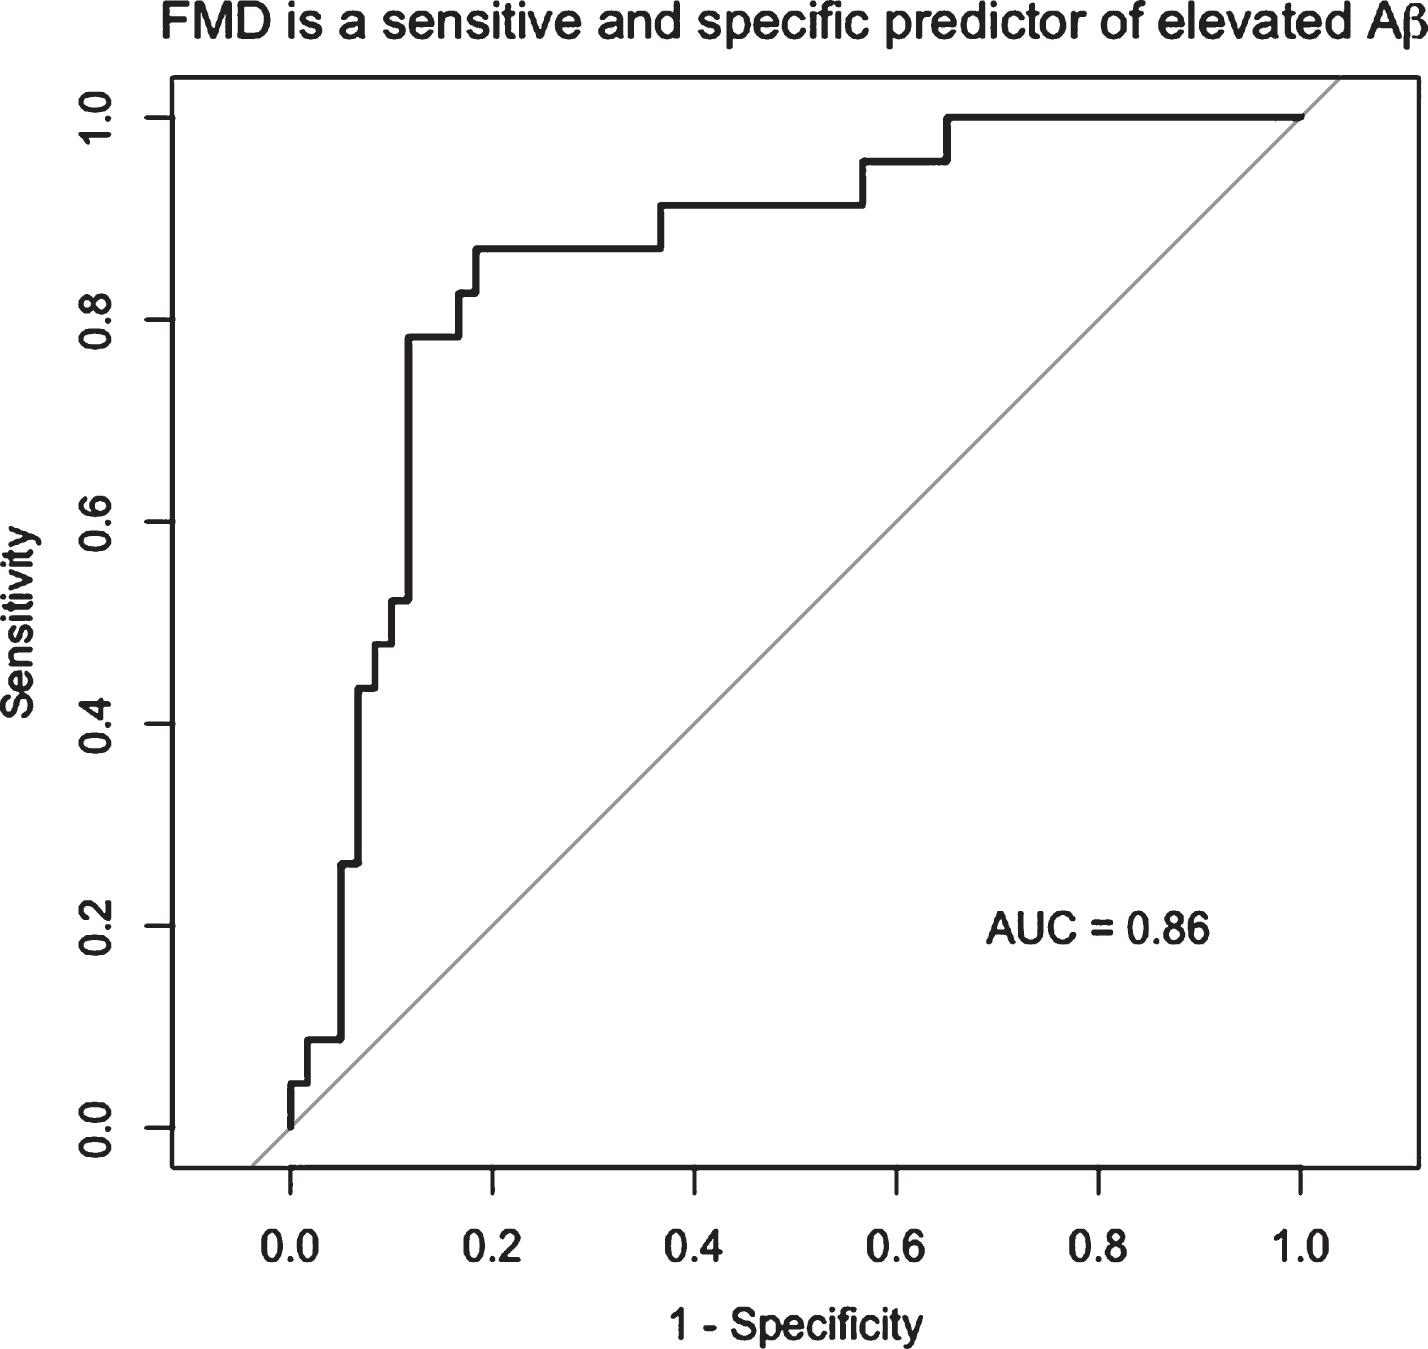 FMD is a sensitive and specific predictor of elevated Aβ. By ROC analysis, the optimal cut point of FMD associated with elevated Aβ was 4.45%, with 88% specificity and 75% sensitivity to elevated Aβ (AUC = 0.86, 95% CI: 0.77–0.95).